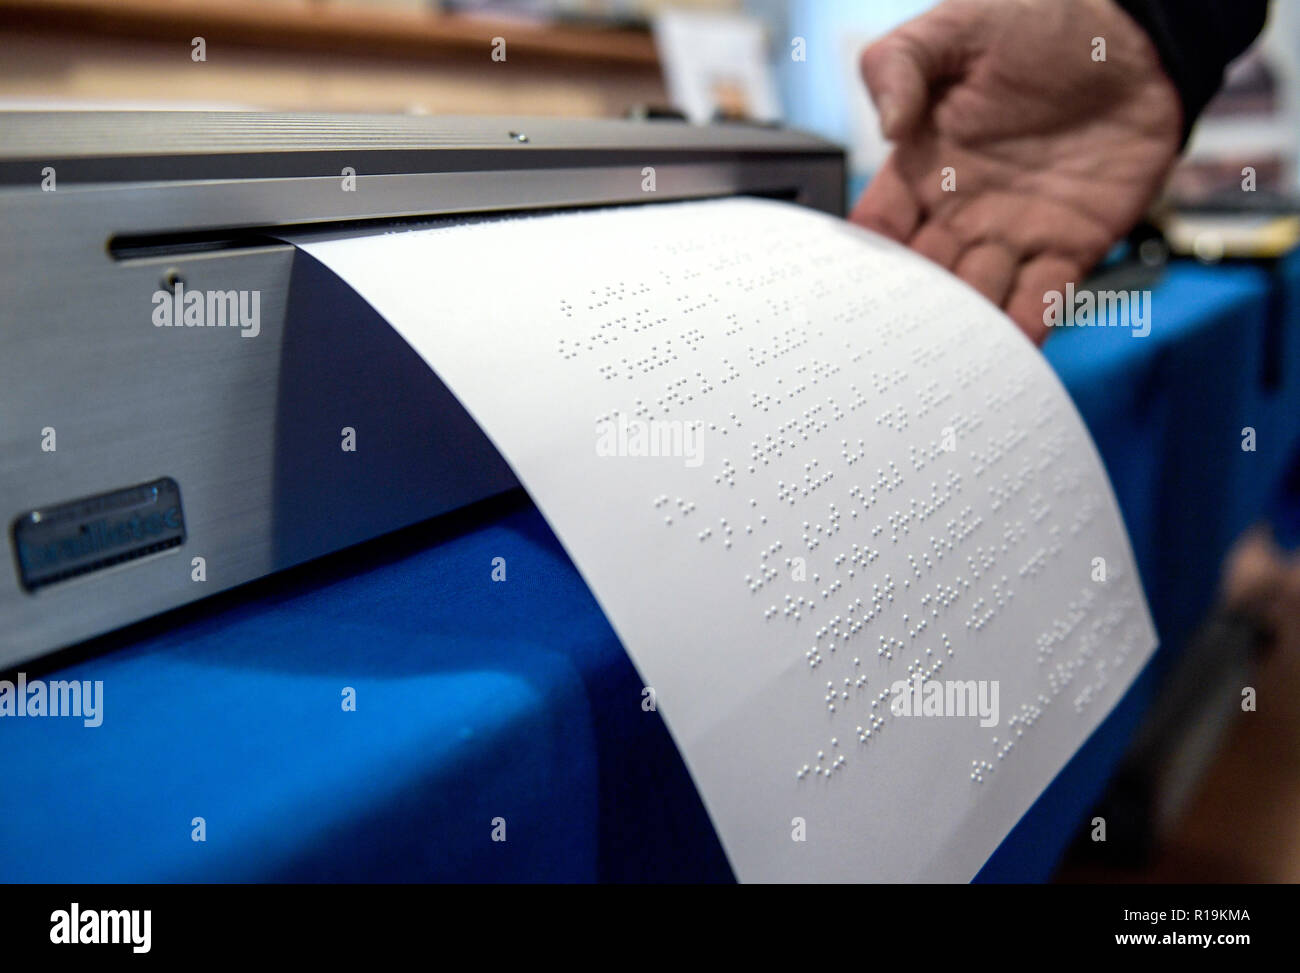 Hamburg, Germany. 10th Nov, 2018. A printer that prints text in Braille is  on display at the "Pandblick" trade fair for visually impaired people in  the Louis Braille Center. The trade fair